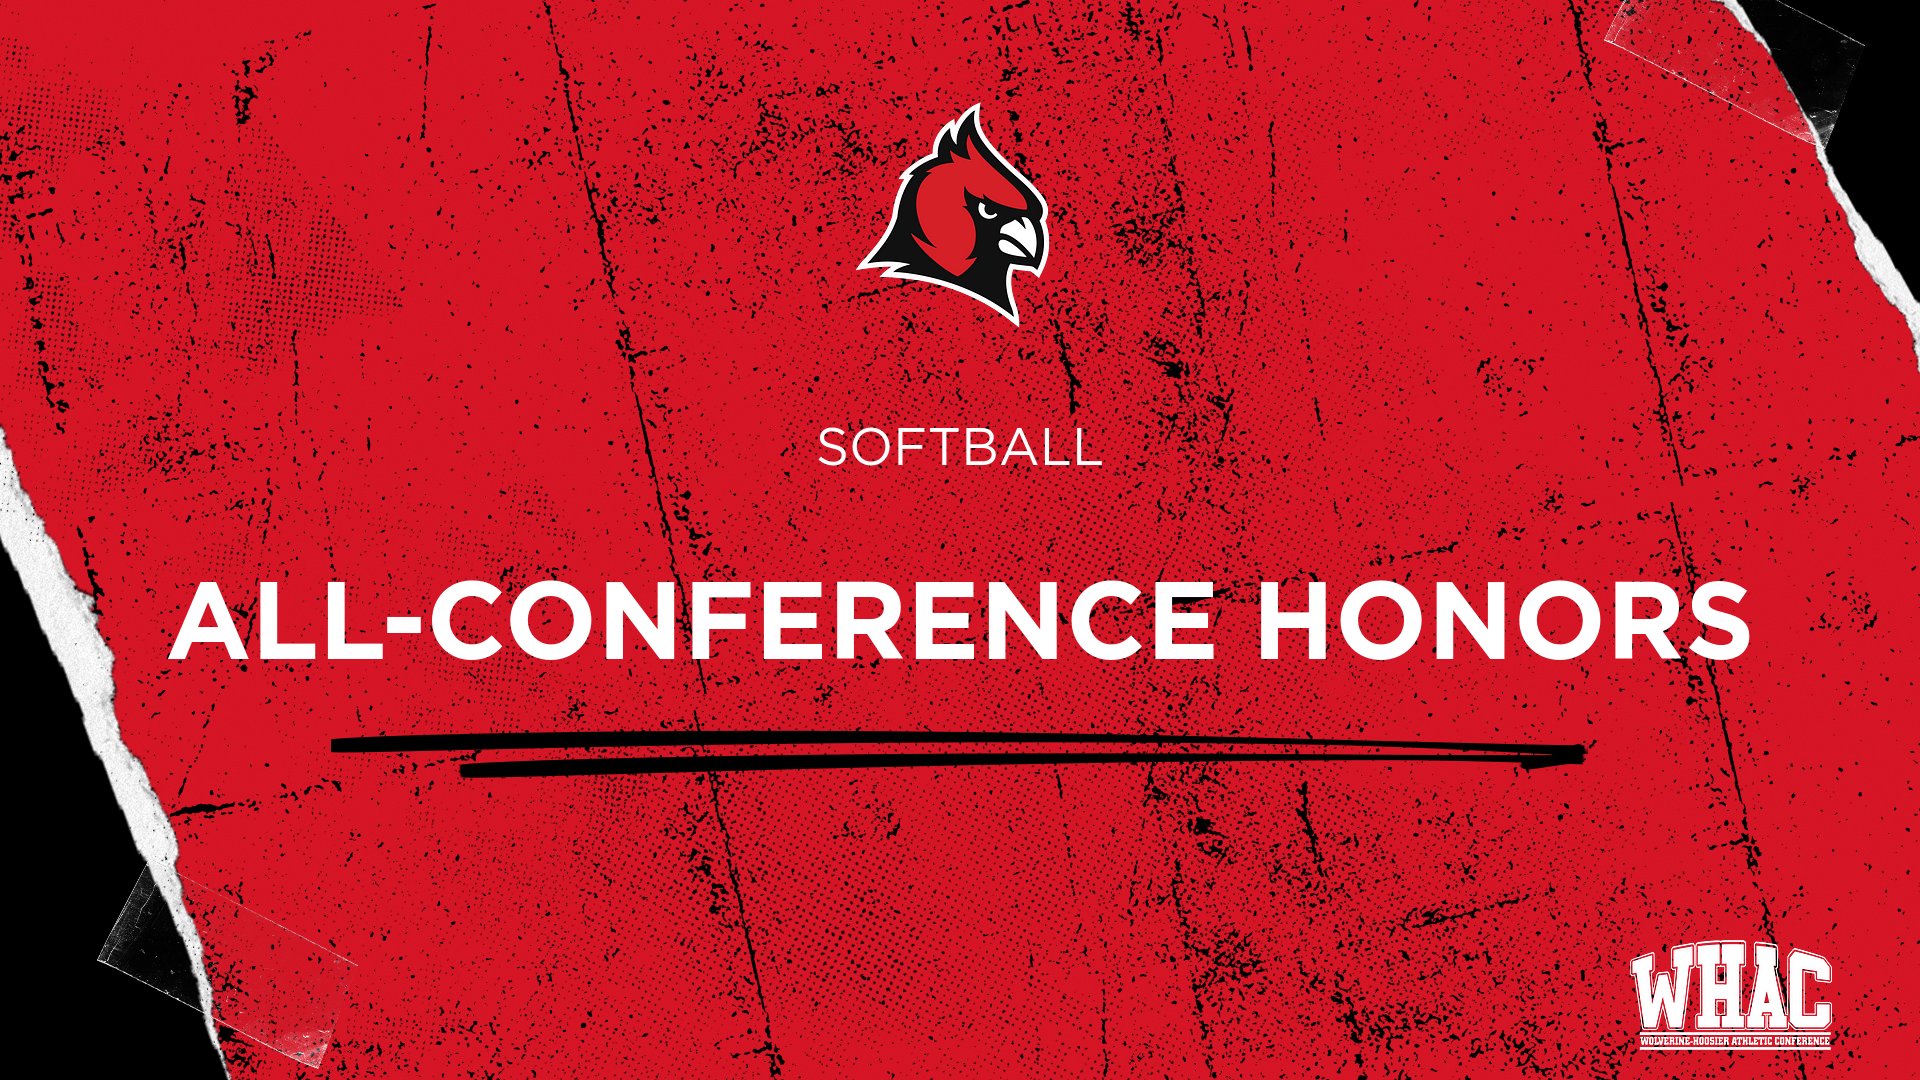 WHAC ALL-CONFERENCE AWARDS: 6 Cardinals earn All-Conference Honors; Headlined by Player of the Year Shannon McAlinden